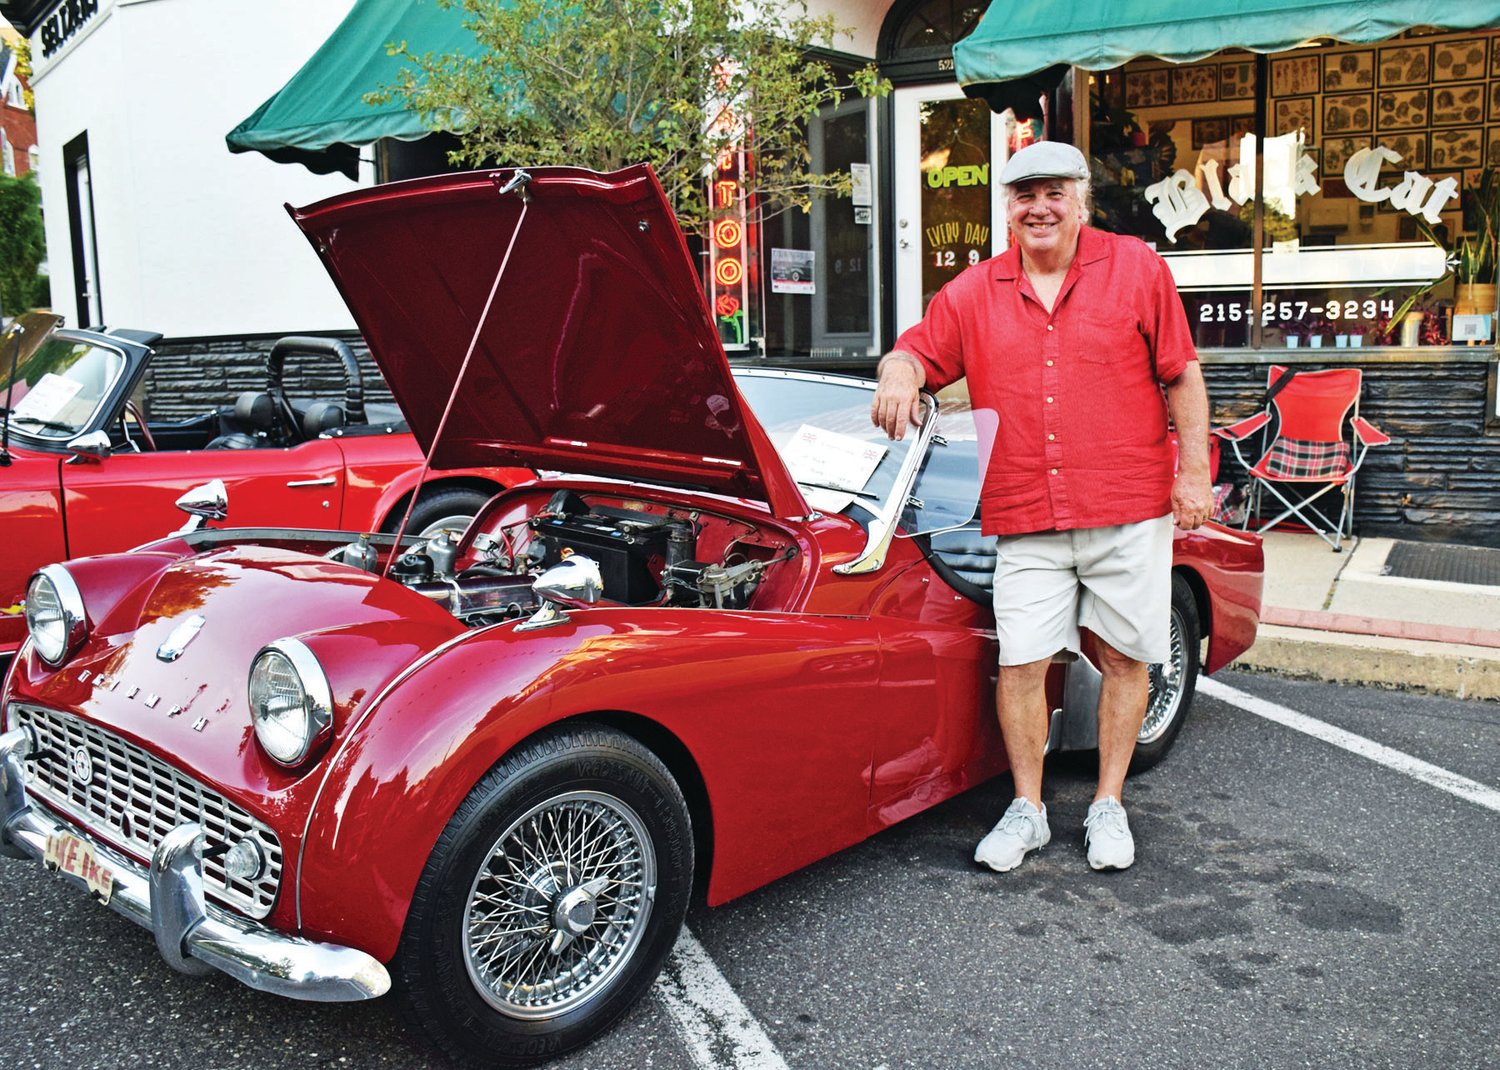 Jim Phillips and his 1962 Triumph on Walnut Street, part of the “The British are Coming” show.